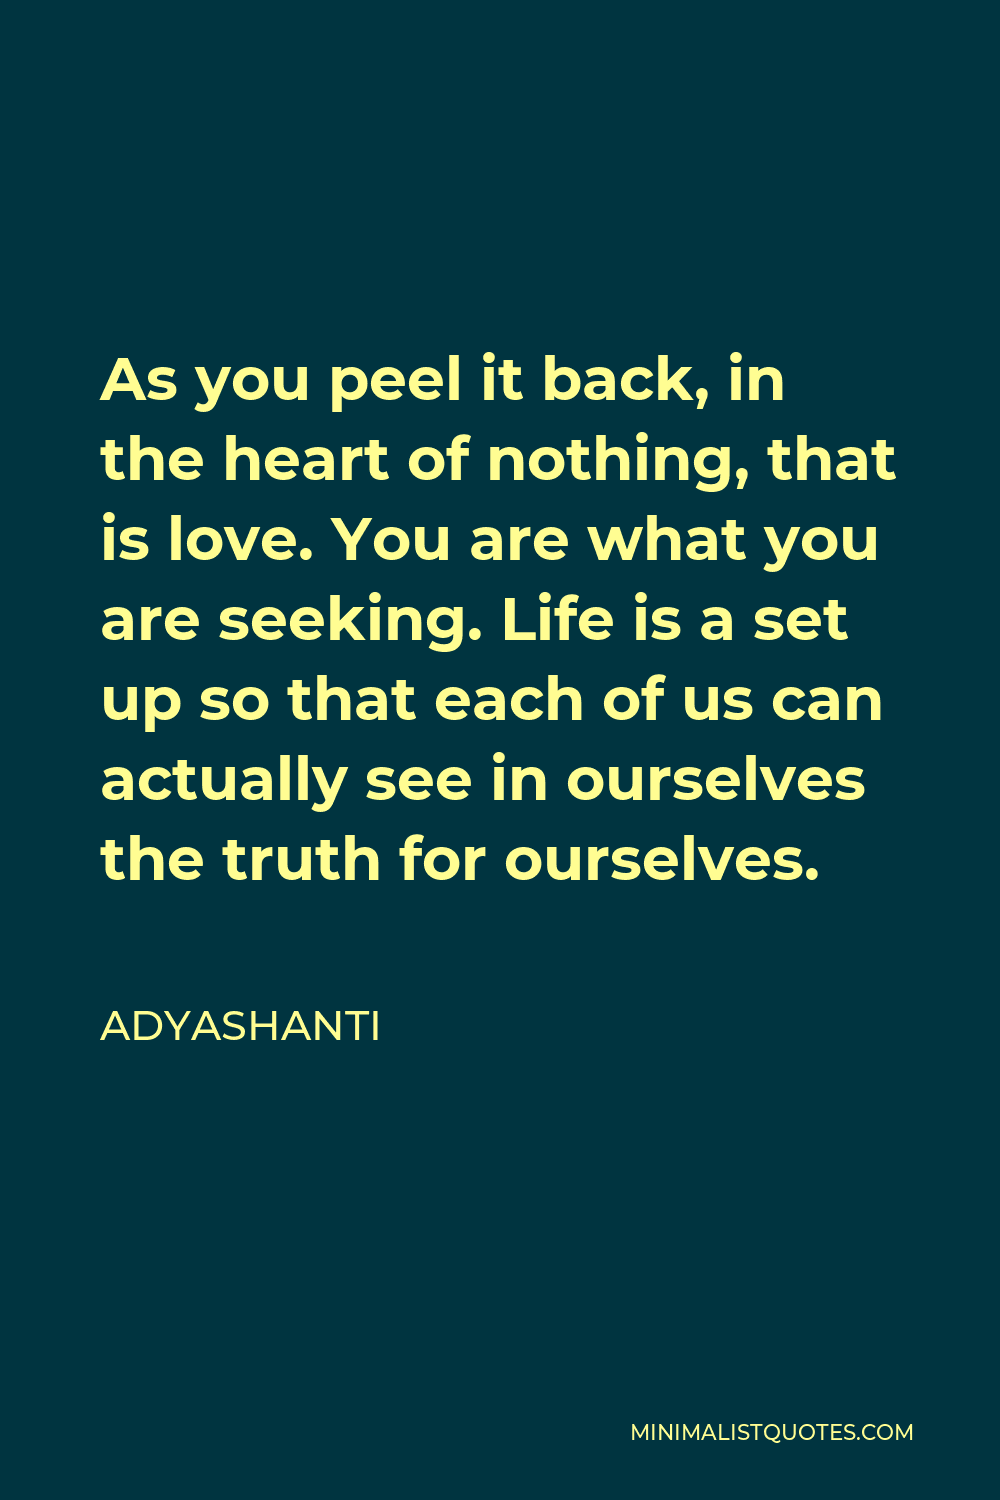 Adyashanti Quote - As you peel it back, in the heart of nothing, that is love. You are what you are seeking. Life is a set up so that each of us can actually see in ourselves the truth for ourselves.